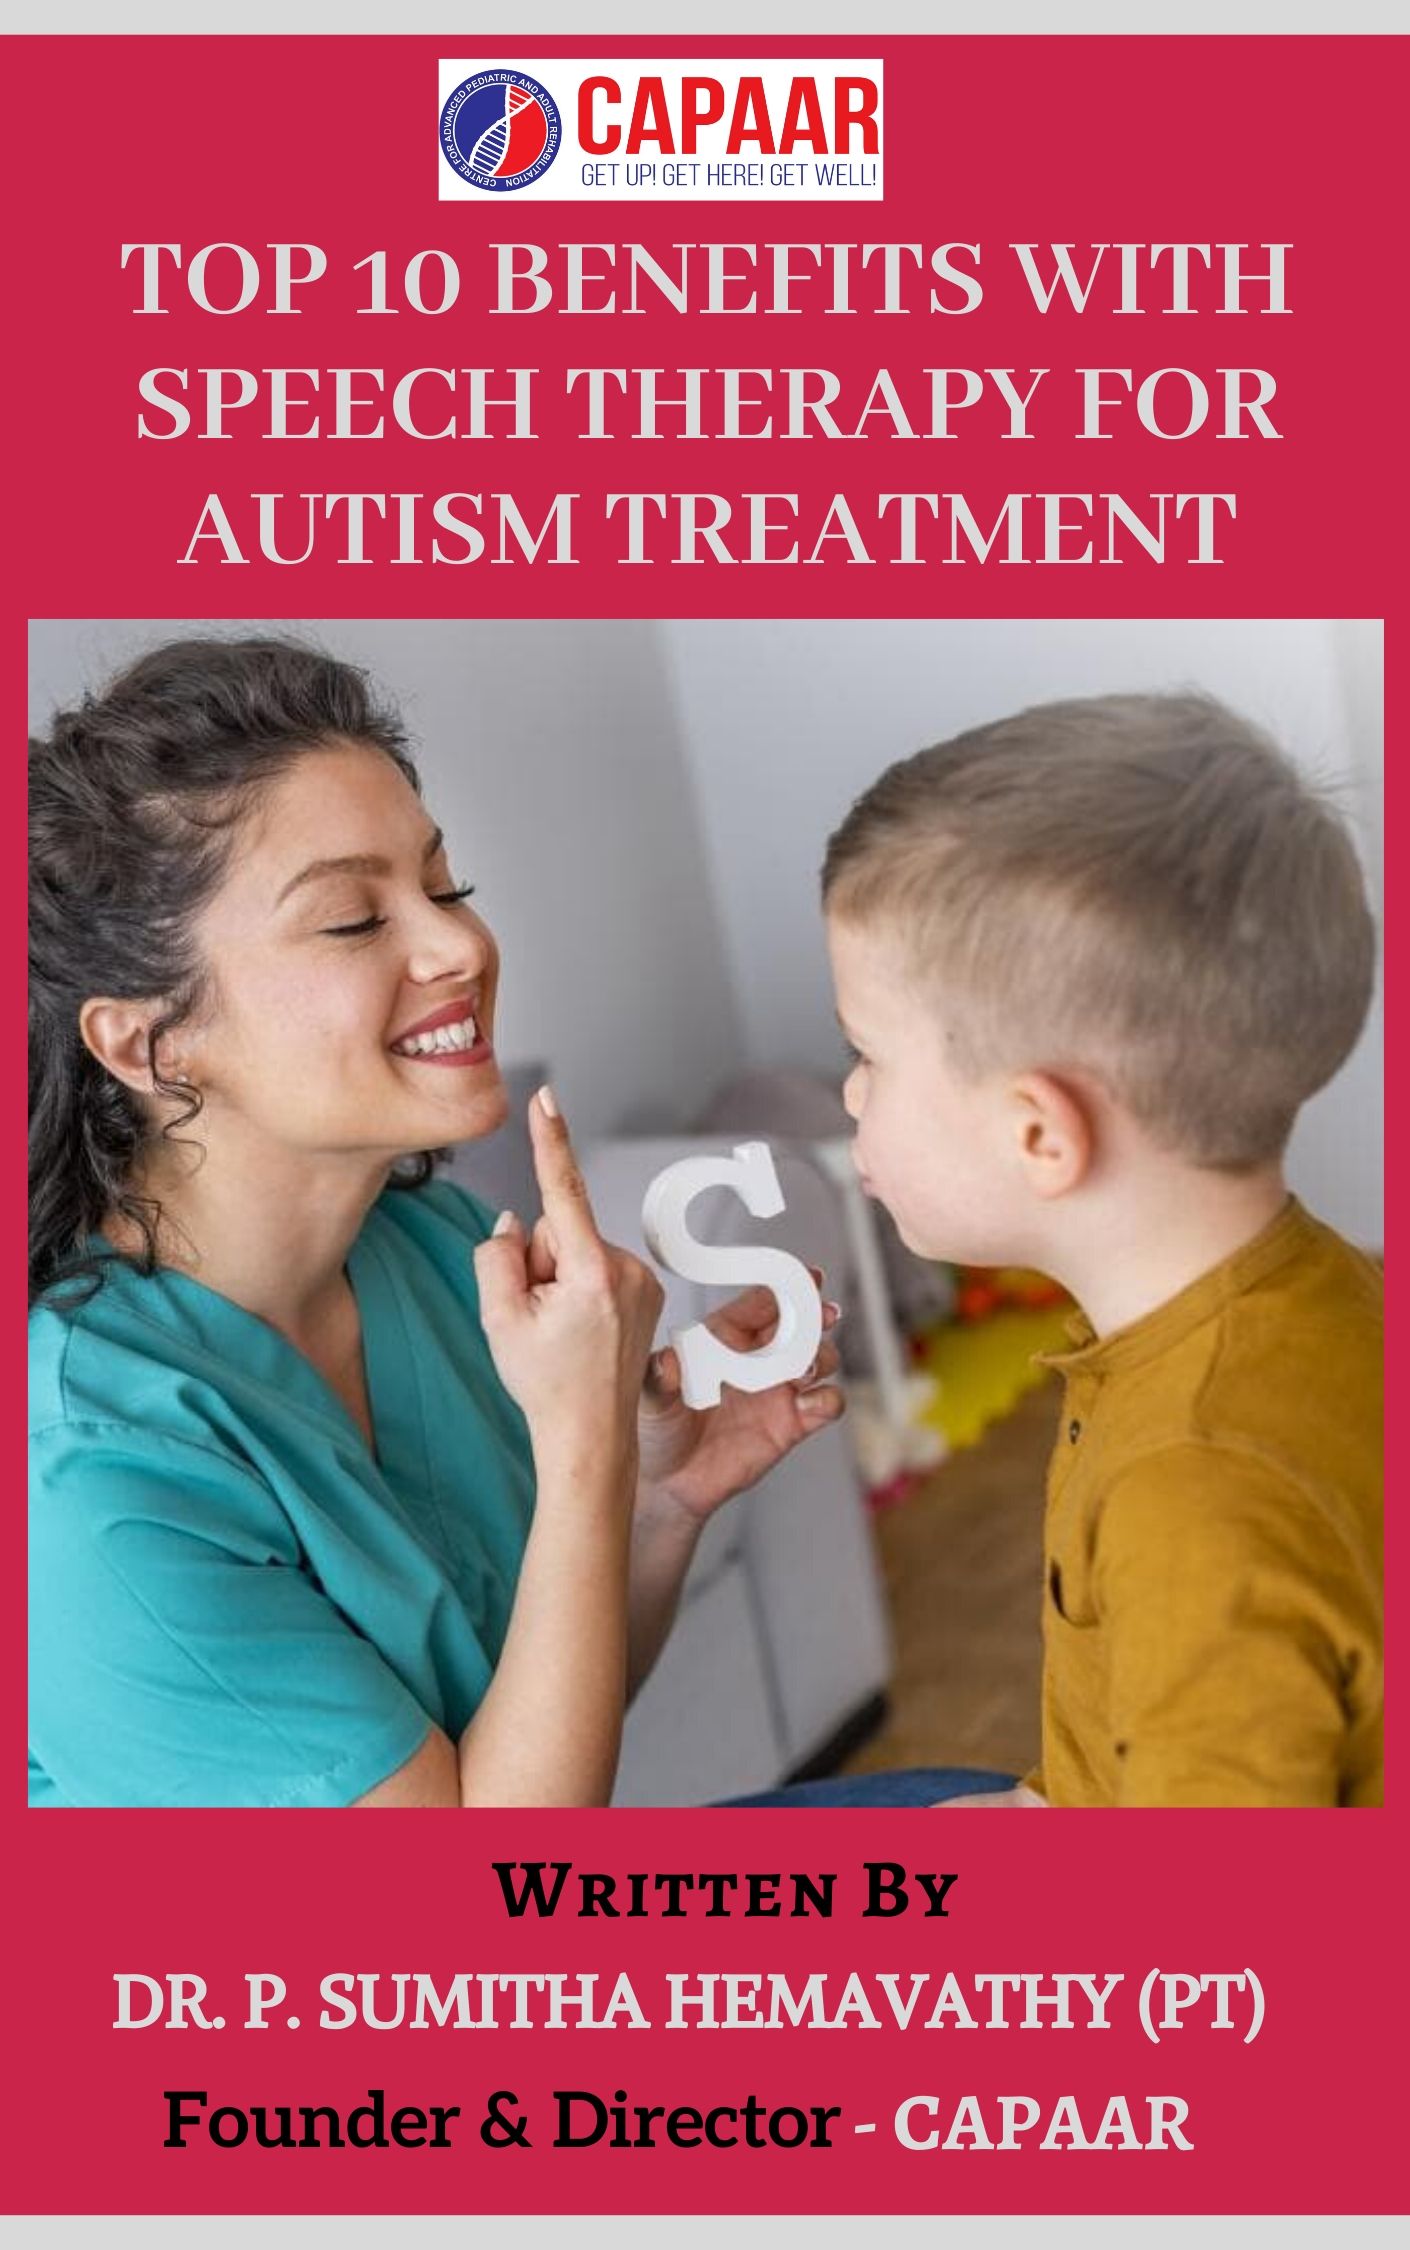 Top 10 Benefits with Speech Therapy for Autism Treatment